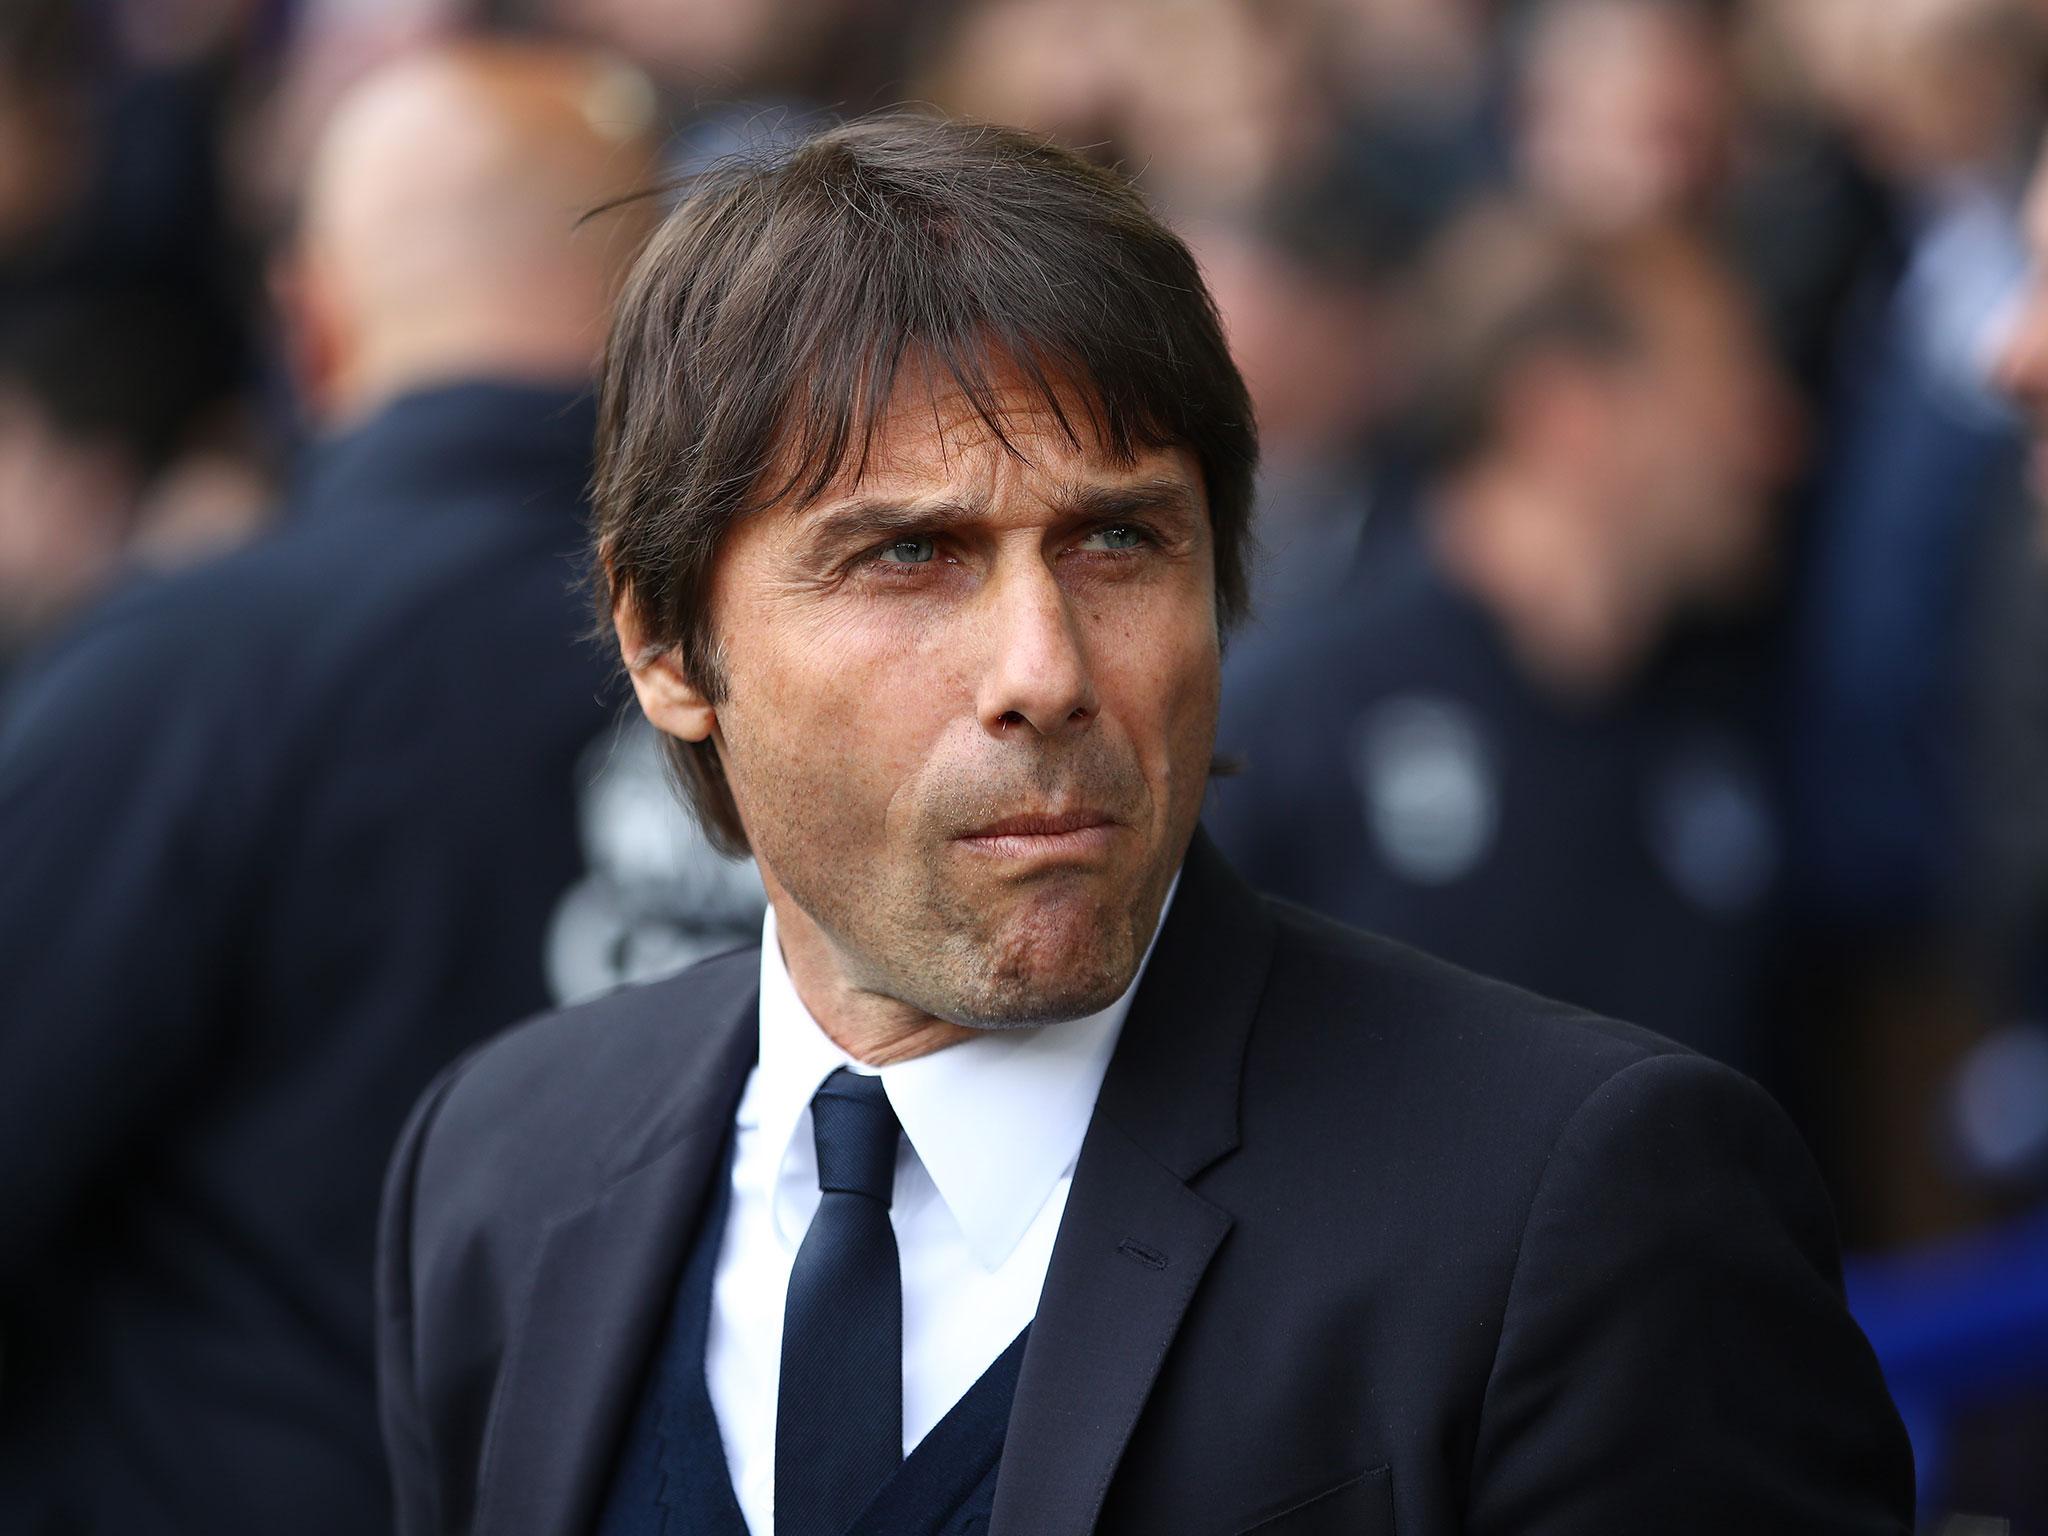 Antonio Conte is not interest in keeping players happy as long as Chelsea continue to win